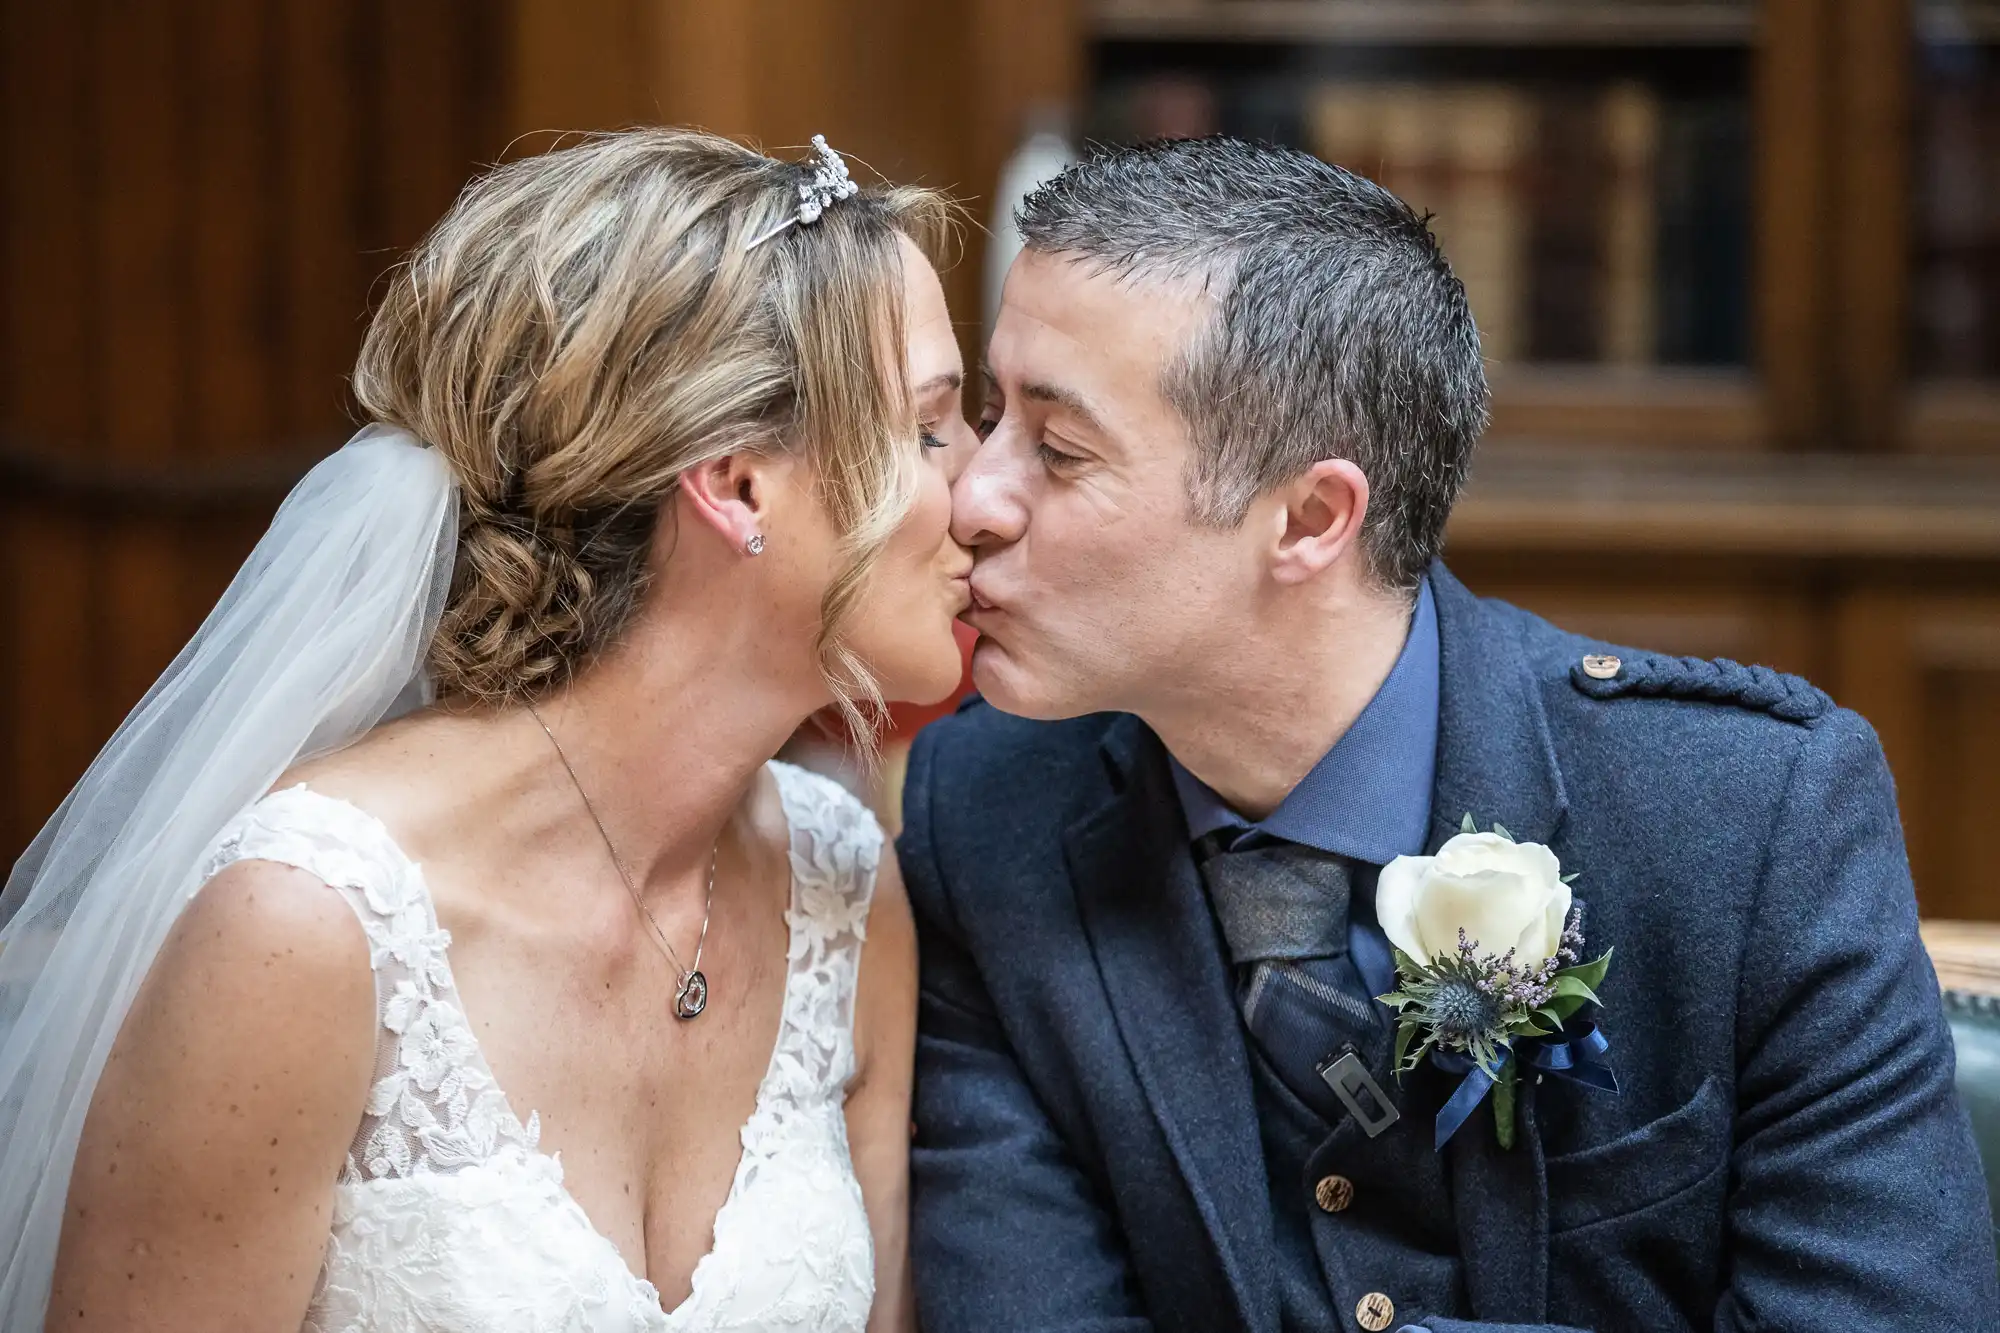 A bride and groom share a kiss. The bride is wearing a lace wedding dress and veil, and the groom is wearing a suit with a boutonniere. Both have closed eyes and look happy.